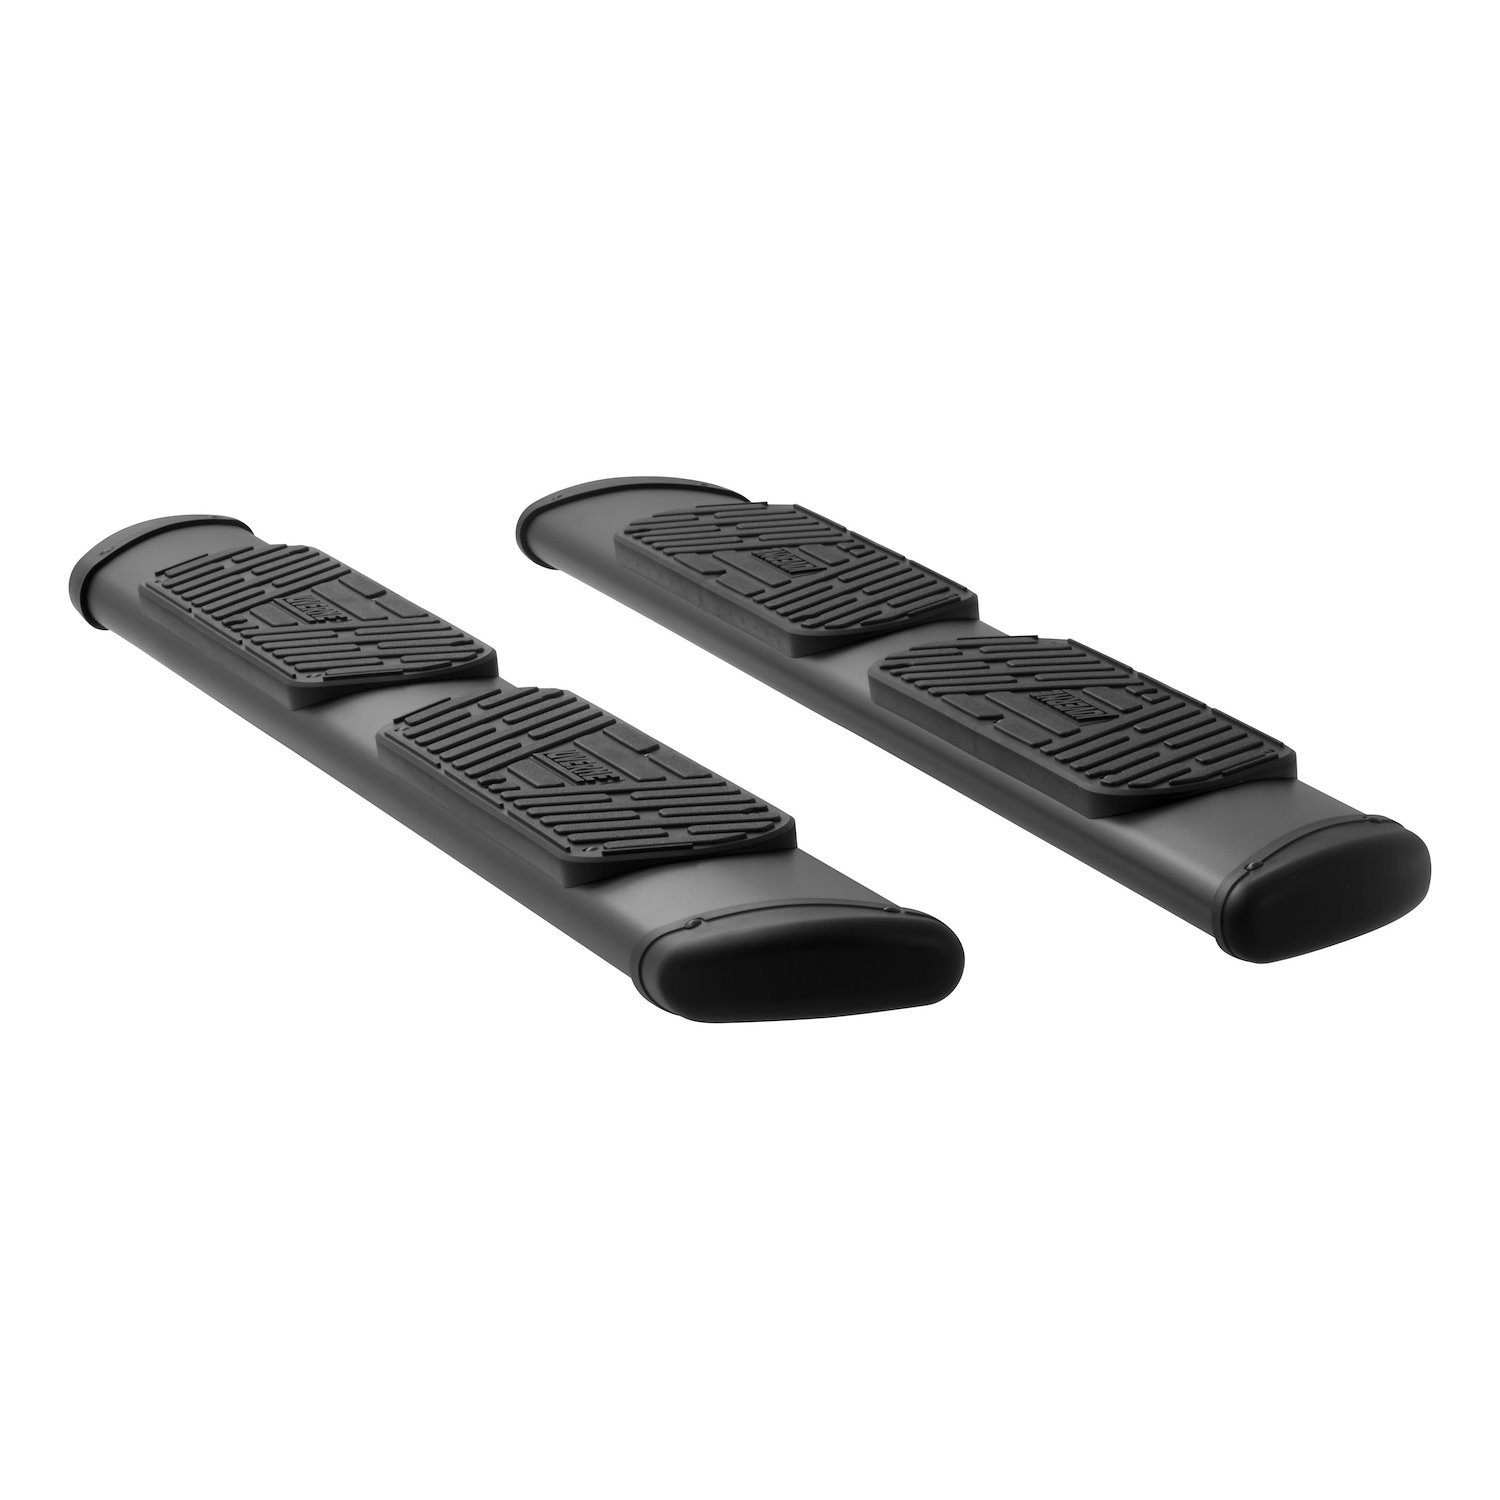 277078-401723 Regal 7 Black Stainless 78 in. Oval Side Steps Fits Select Ford F250, F350, F450, F550